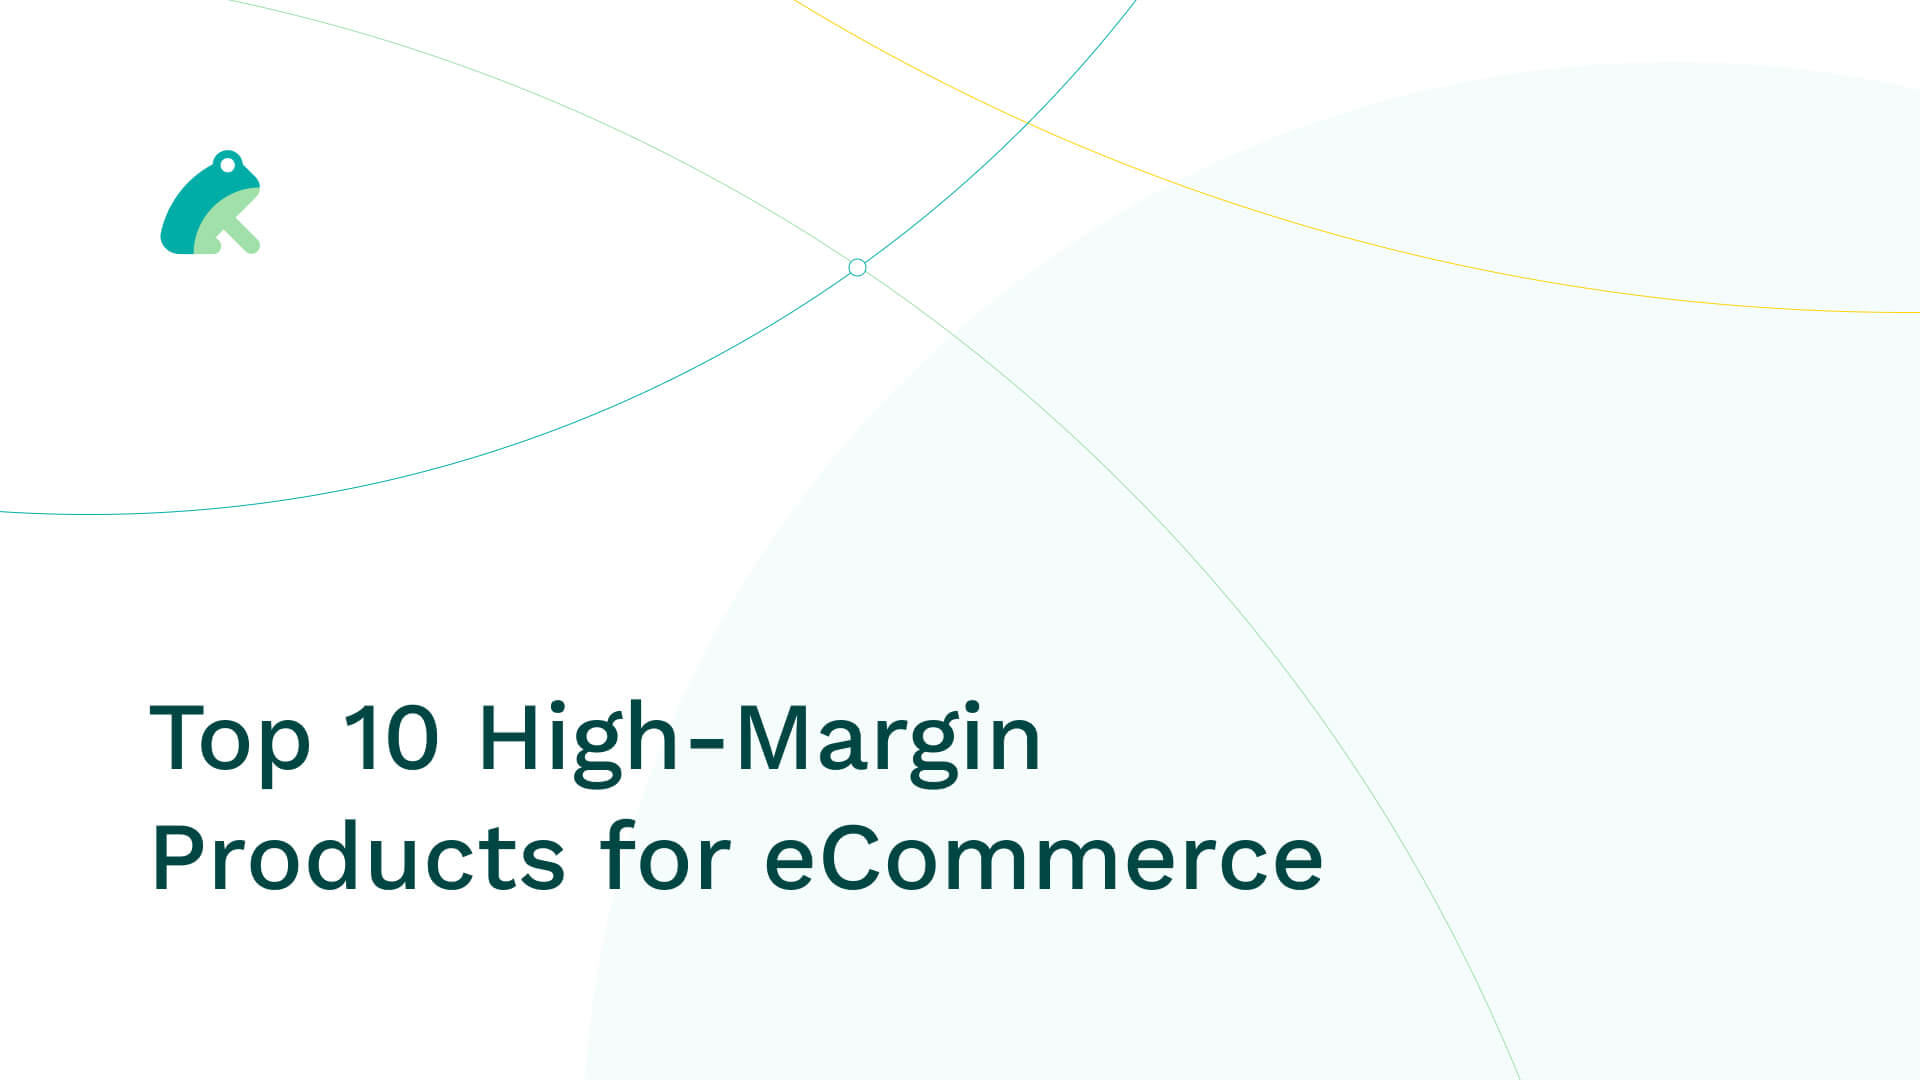 Top 10 High-Margin Products for eCommerce